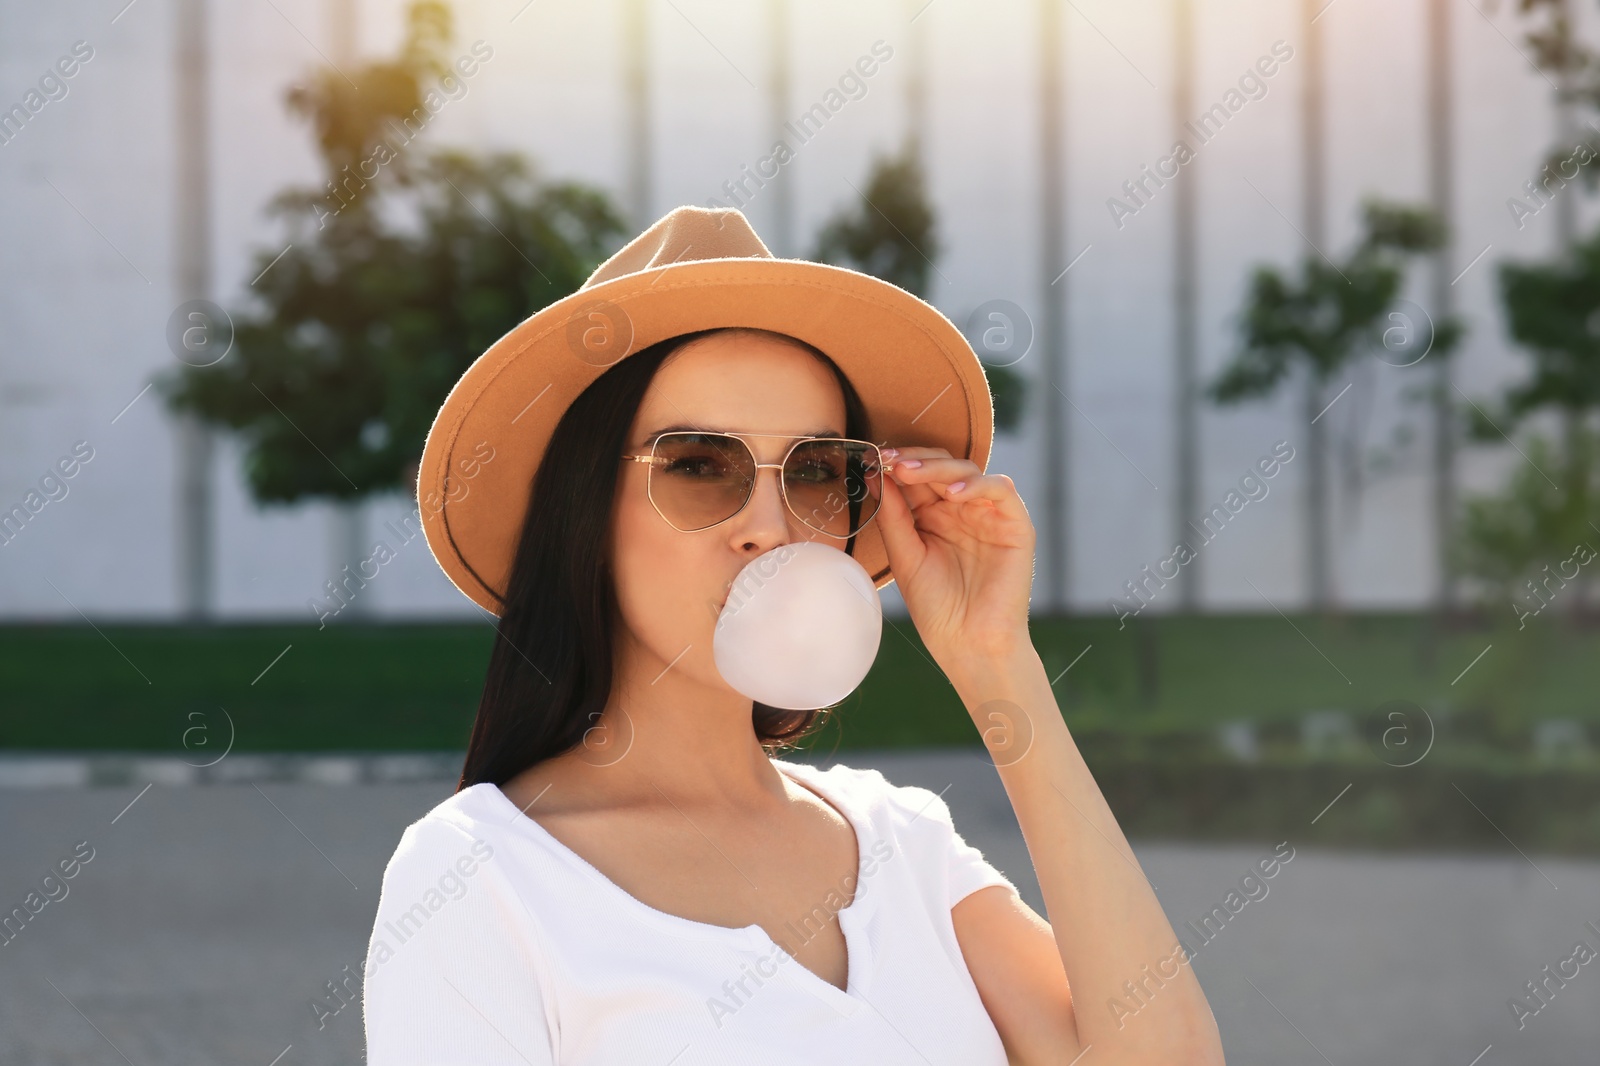 Photo of Beautiful woman in stylish sunglasses blowing gum outdoors on sunny day